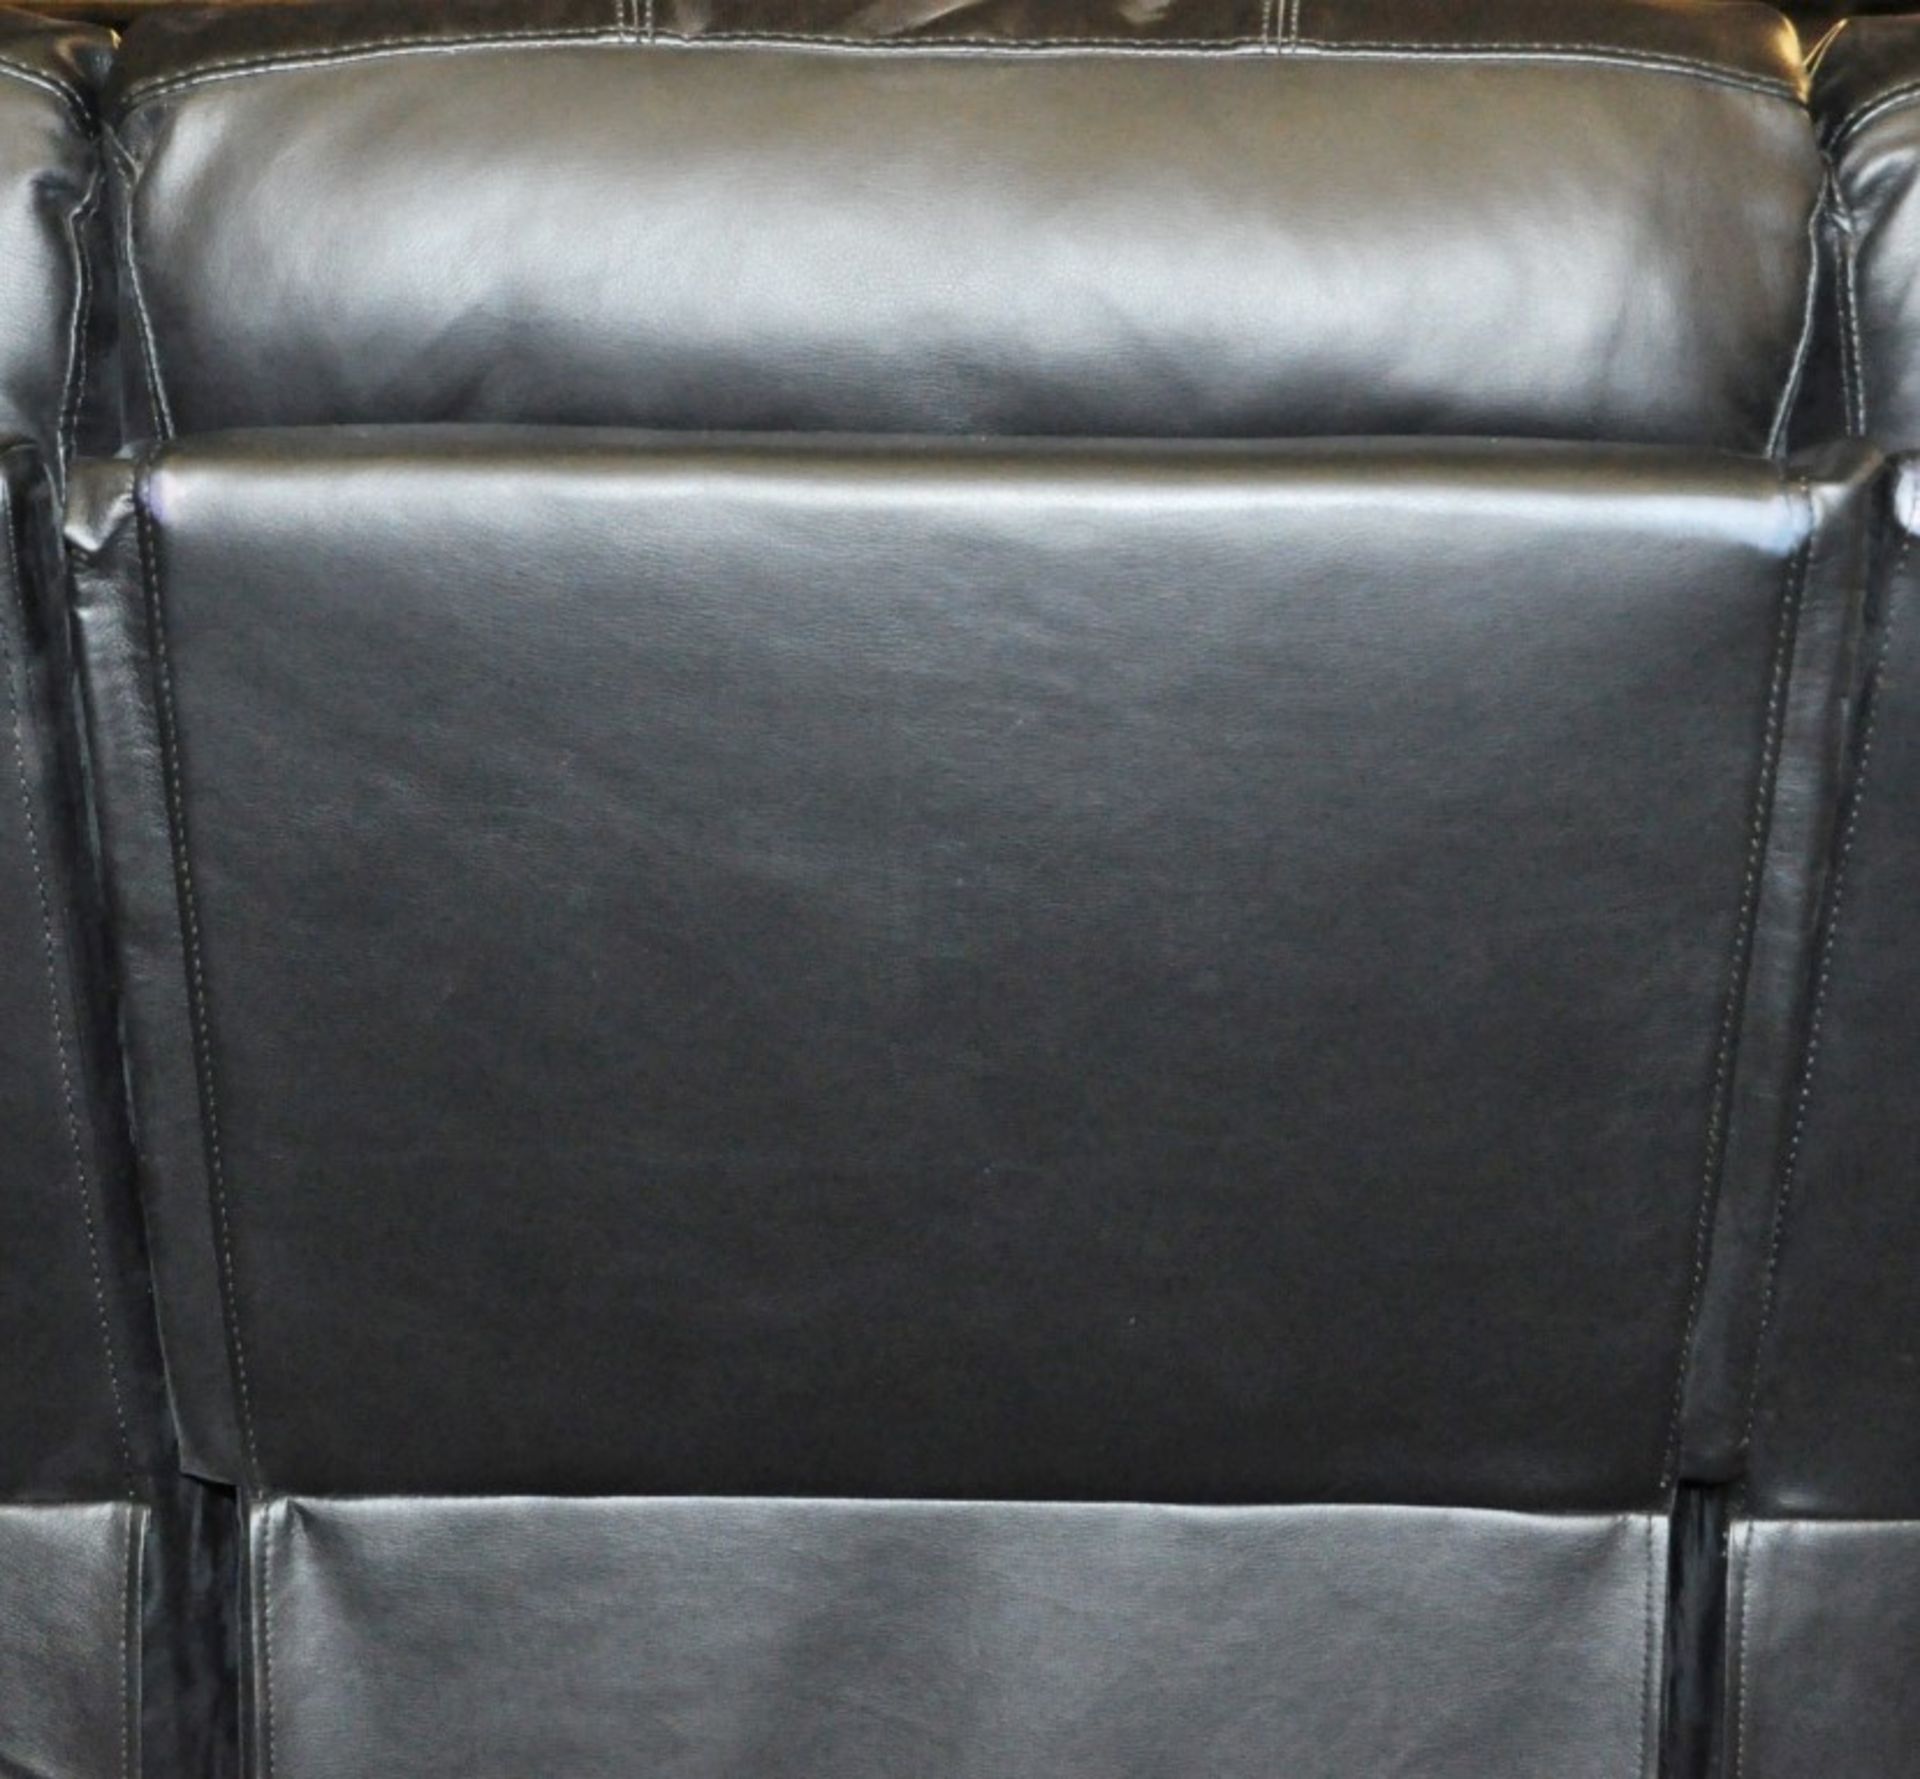 1 x Stylish Black Real Leather 3 Seater Sofa with Reclining Seat – RRP £1,299.00 - Banded Leather - Image 2 of 3